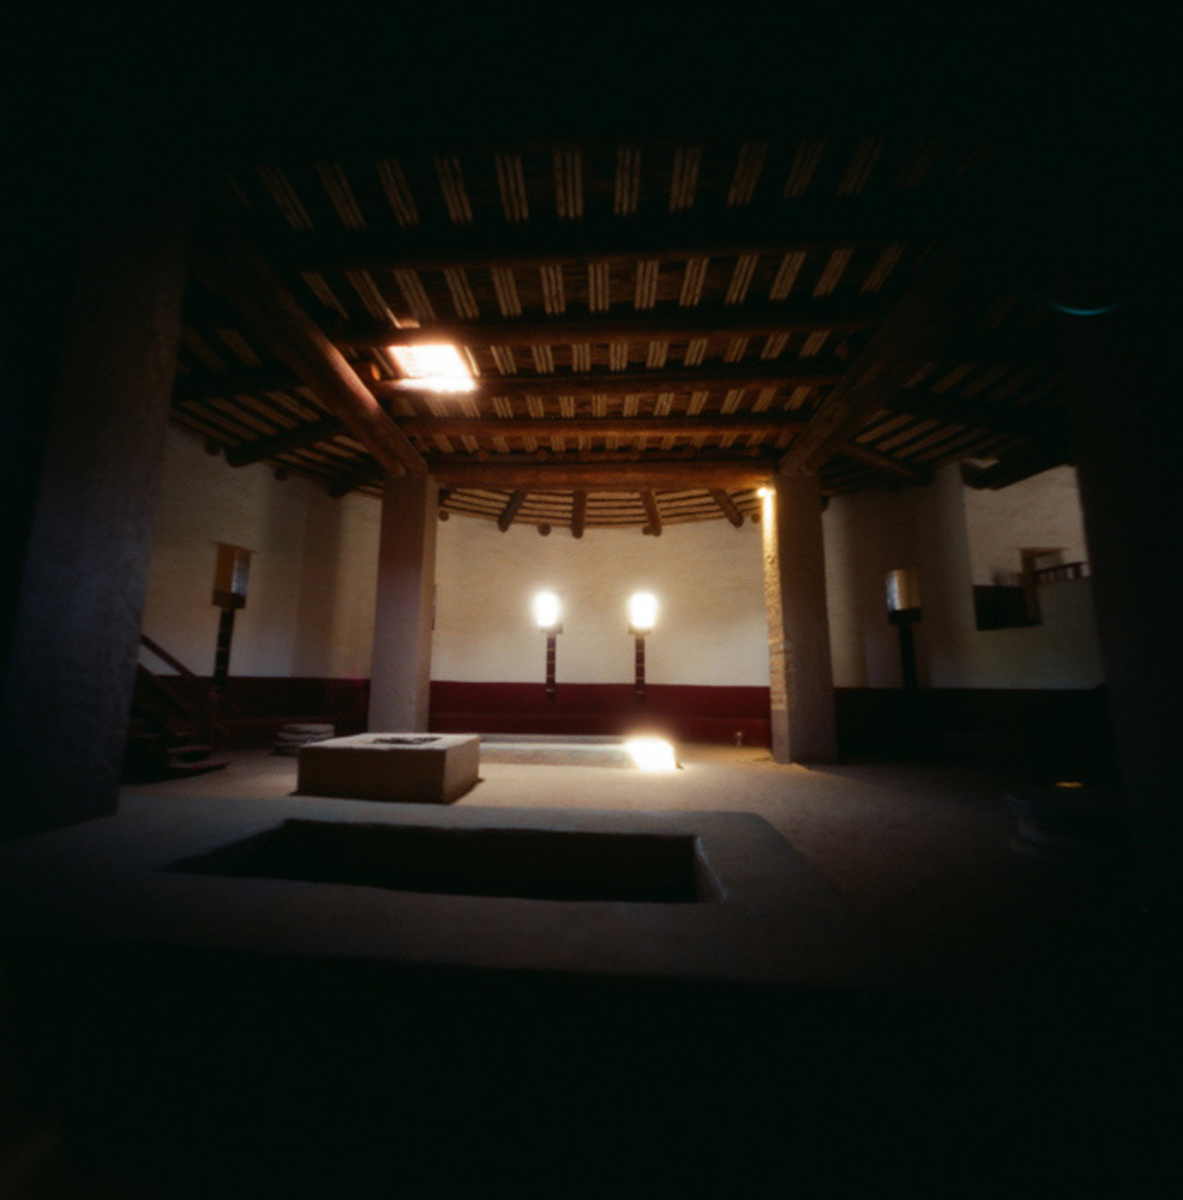 5 Frames… In the Great Kiva with Kodak Portra 400 (EI 400 / 120 format / Reality So Subtle 6X6F)